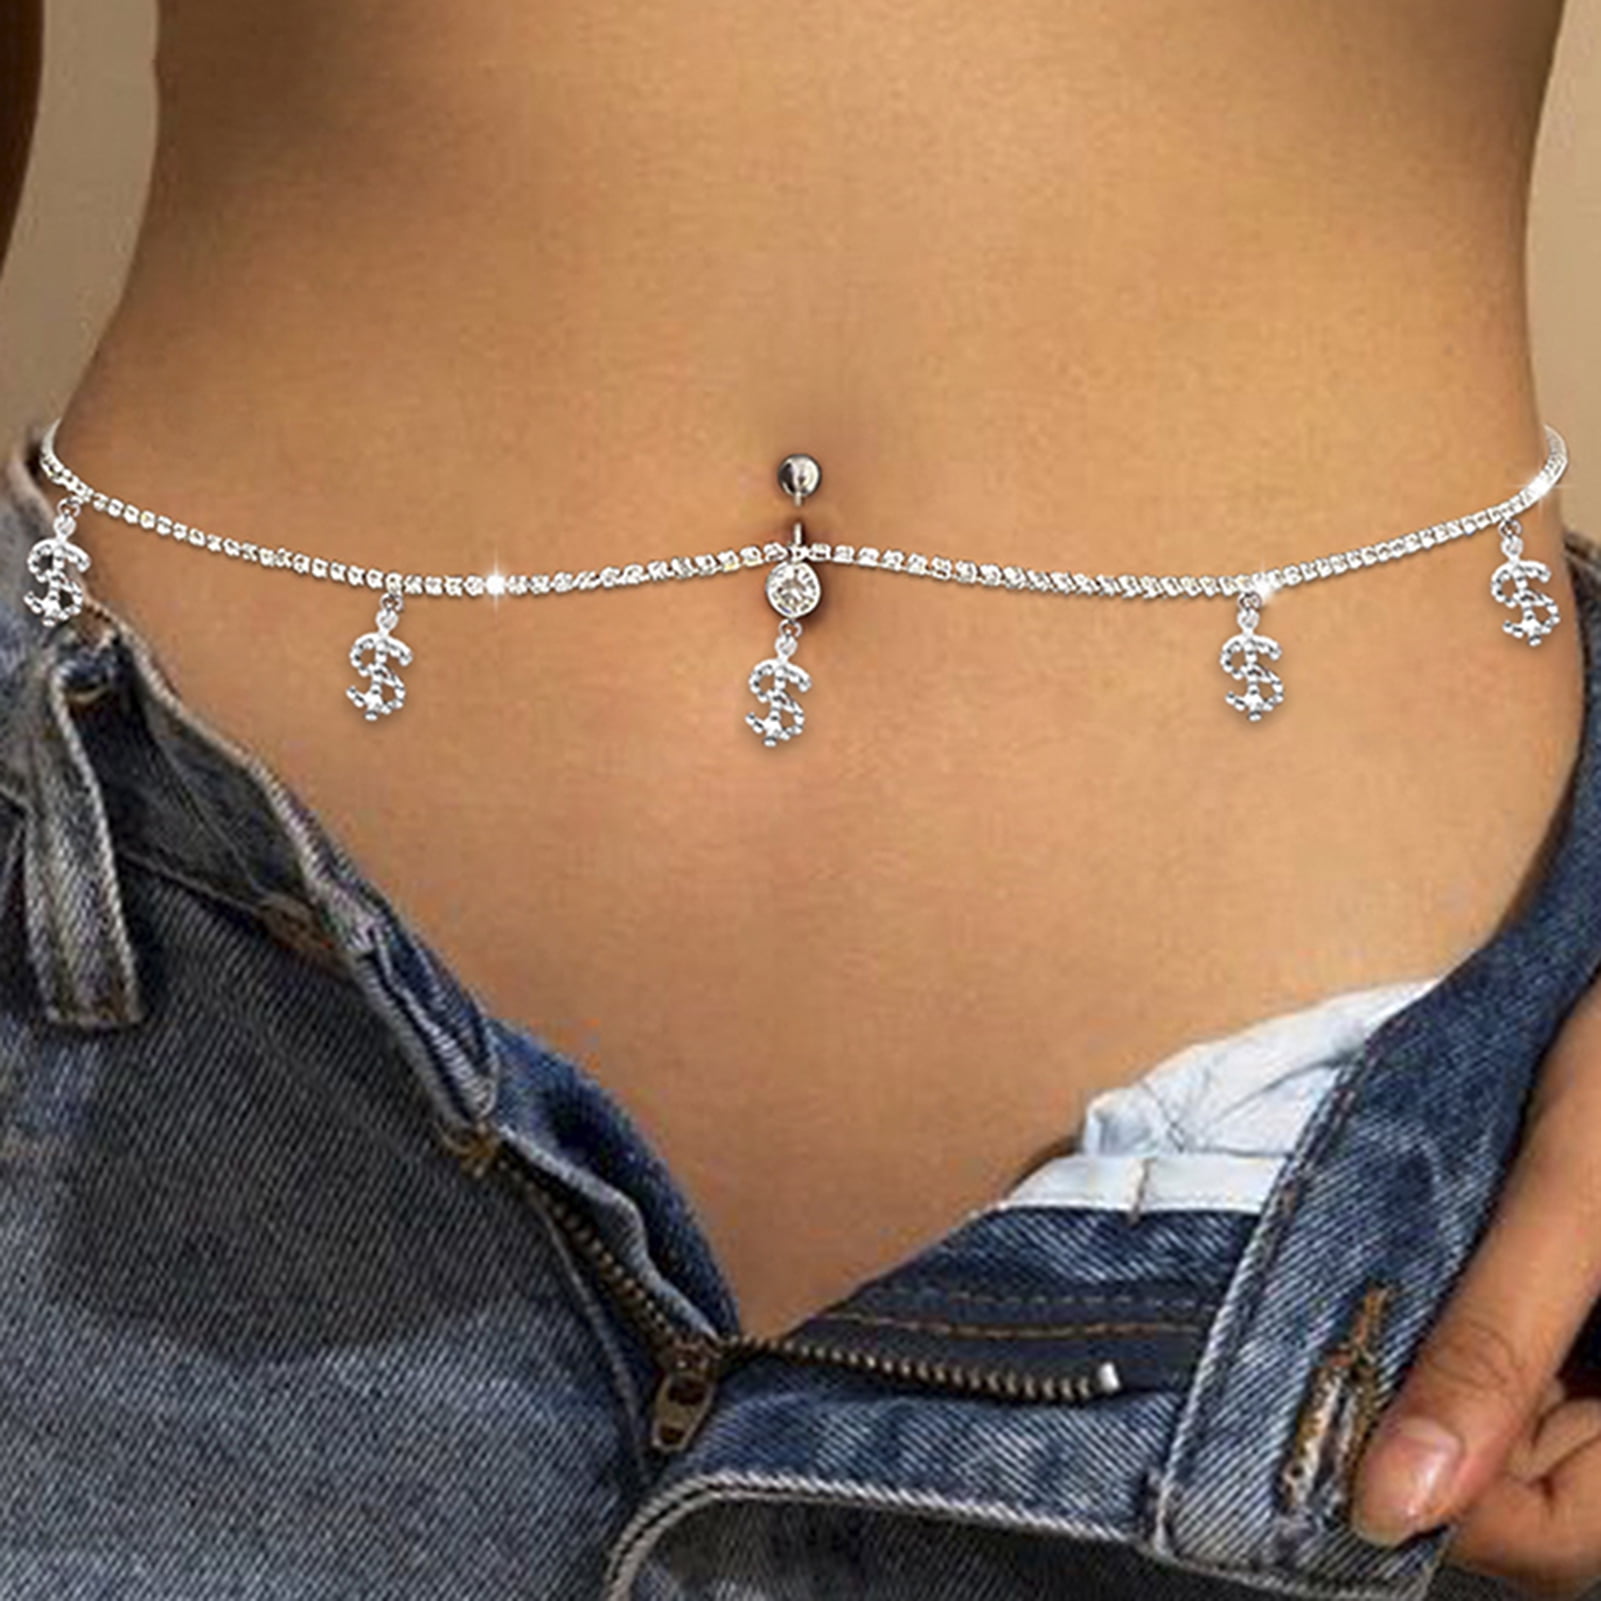 Belly Button Ring 14K White Gold with Flower 0.62 Diamond 004873